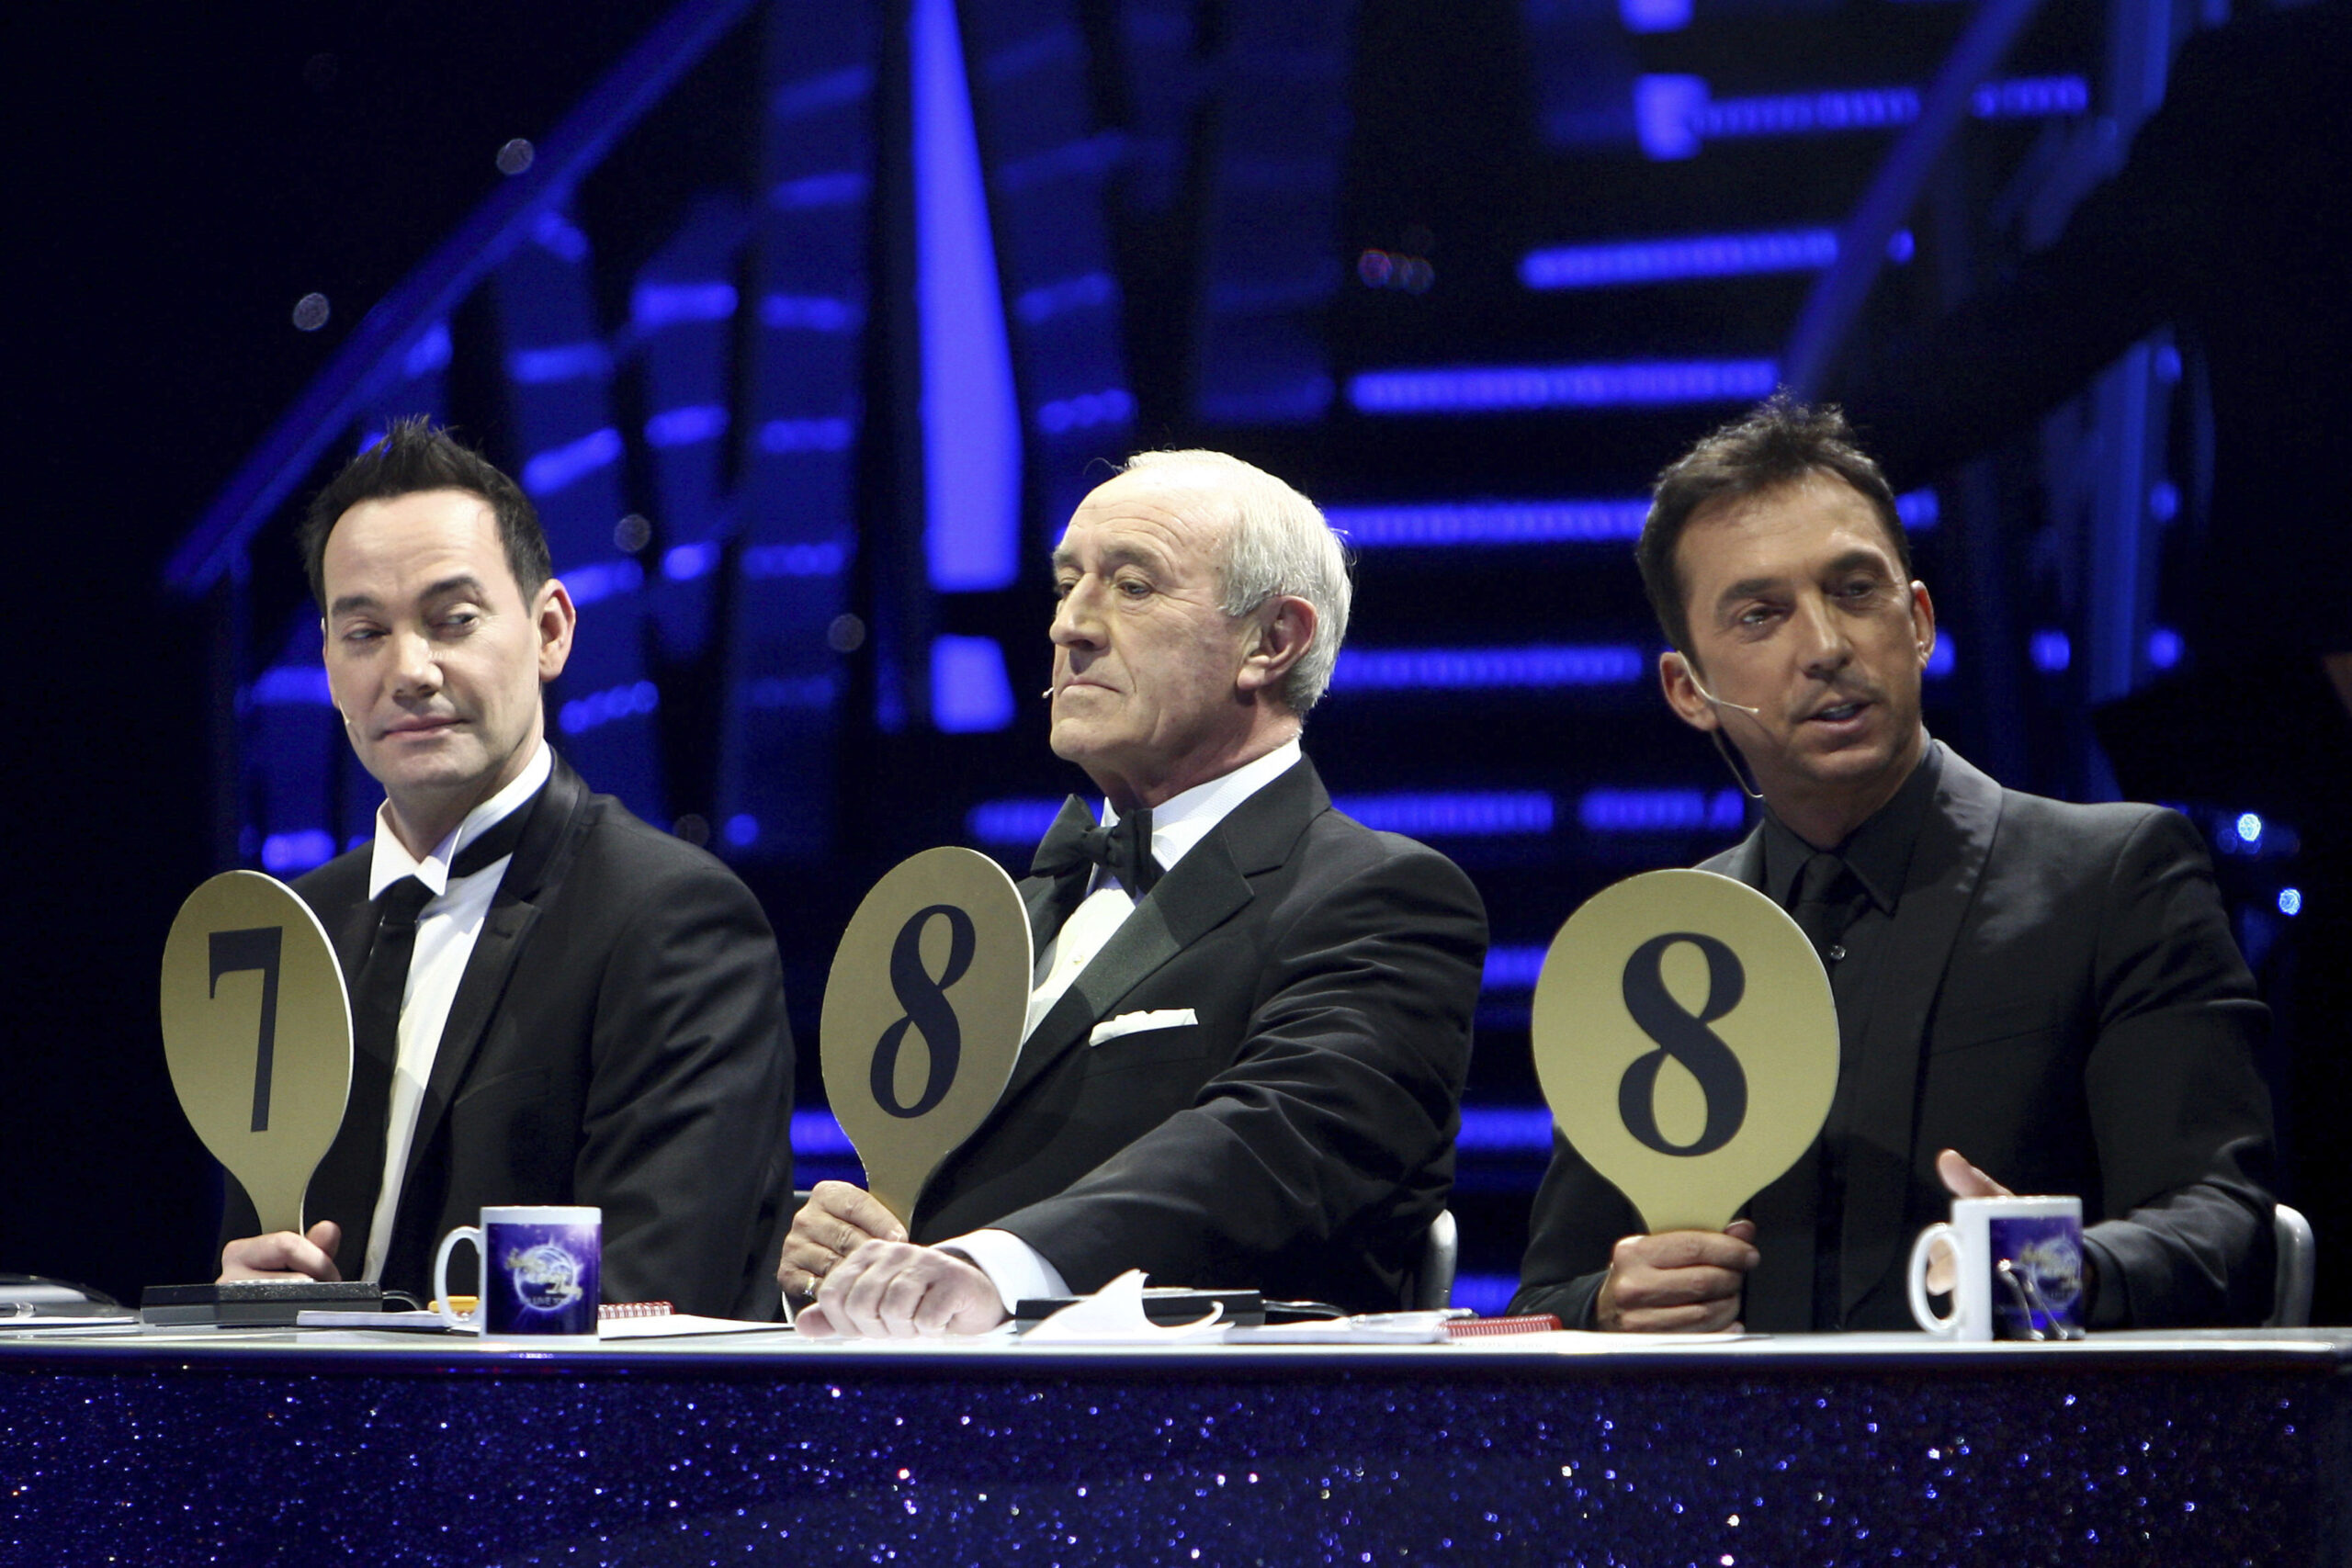 FILE - From left, judges Craig Revel Horwood, Len Goodman and Bruno Tonioli gesture, during the fin...